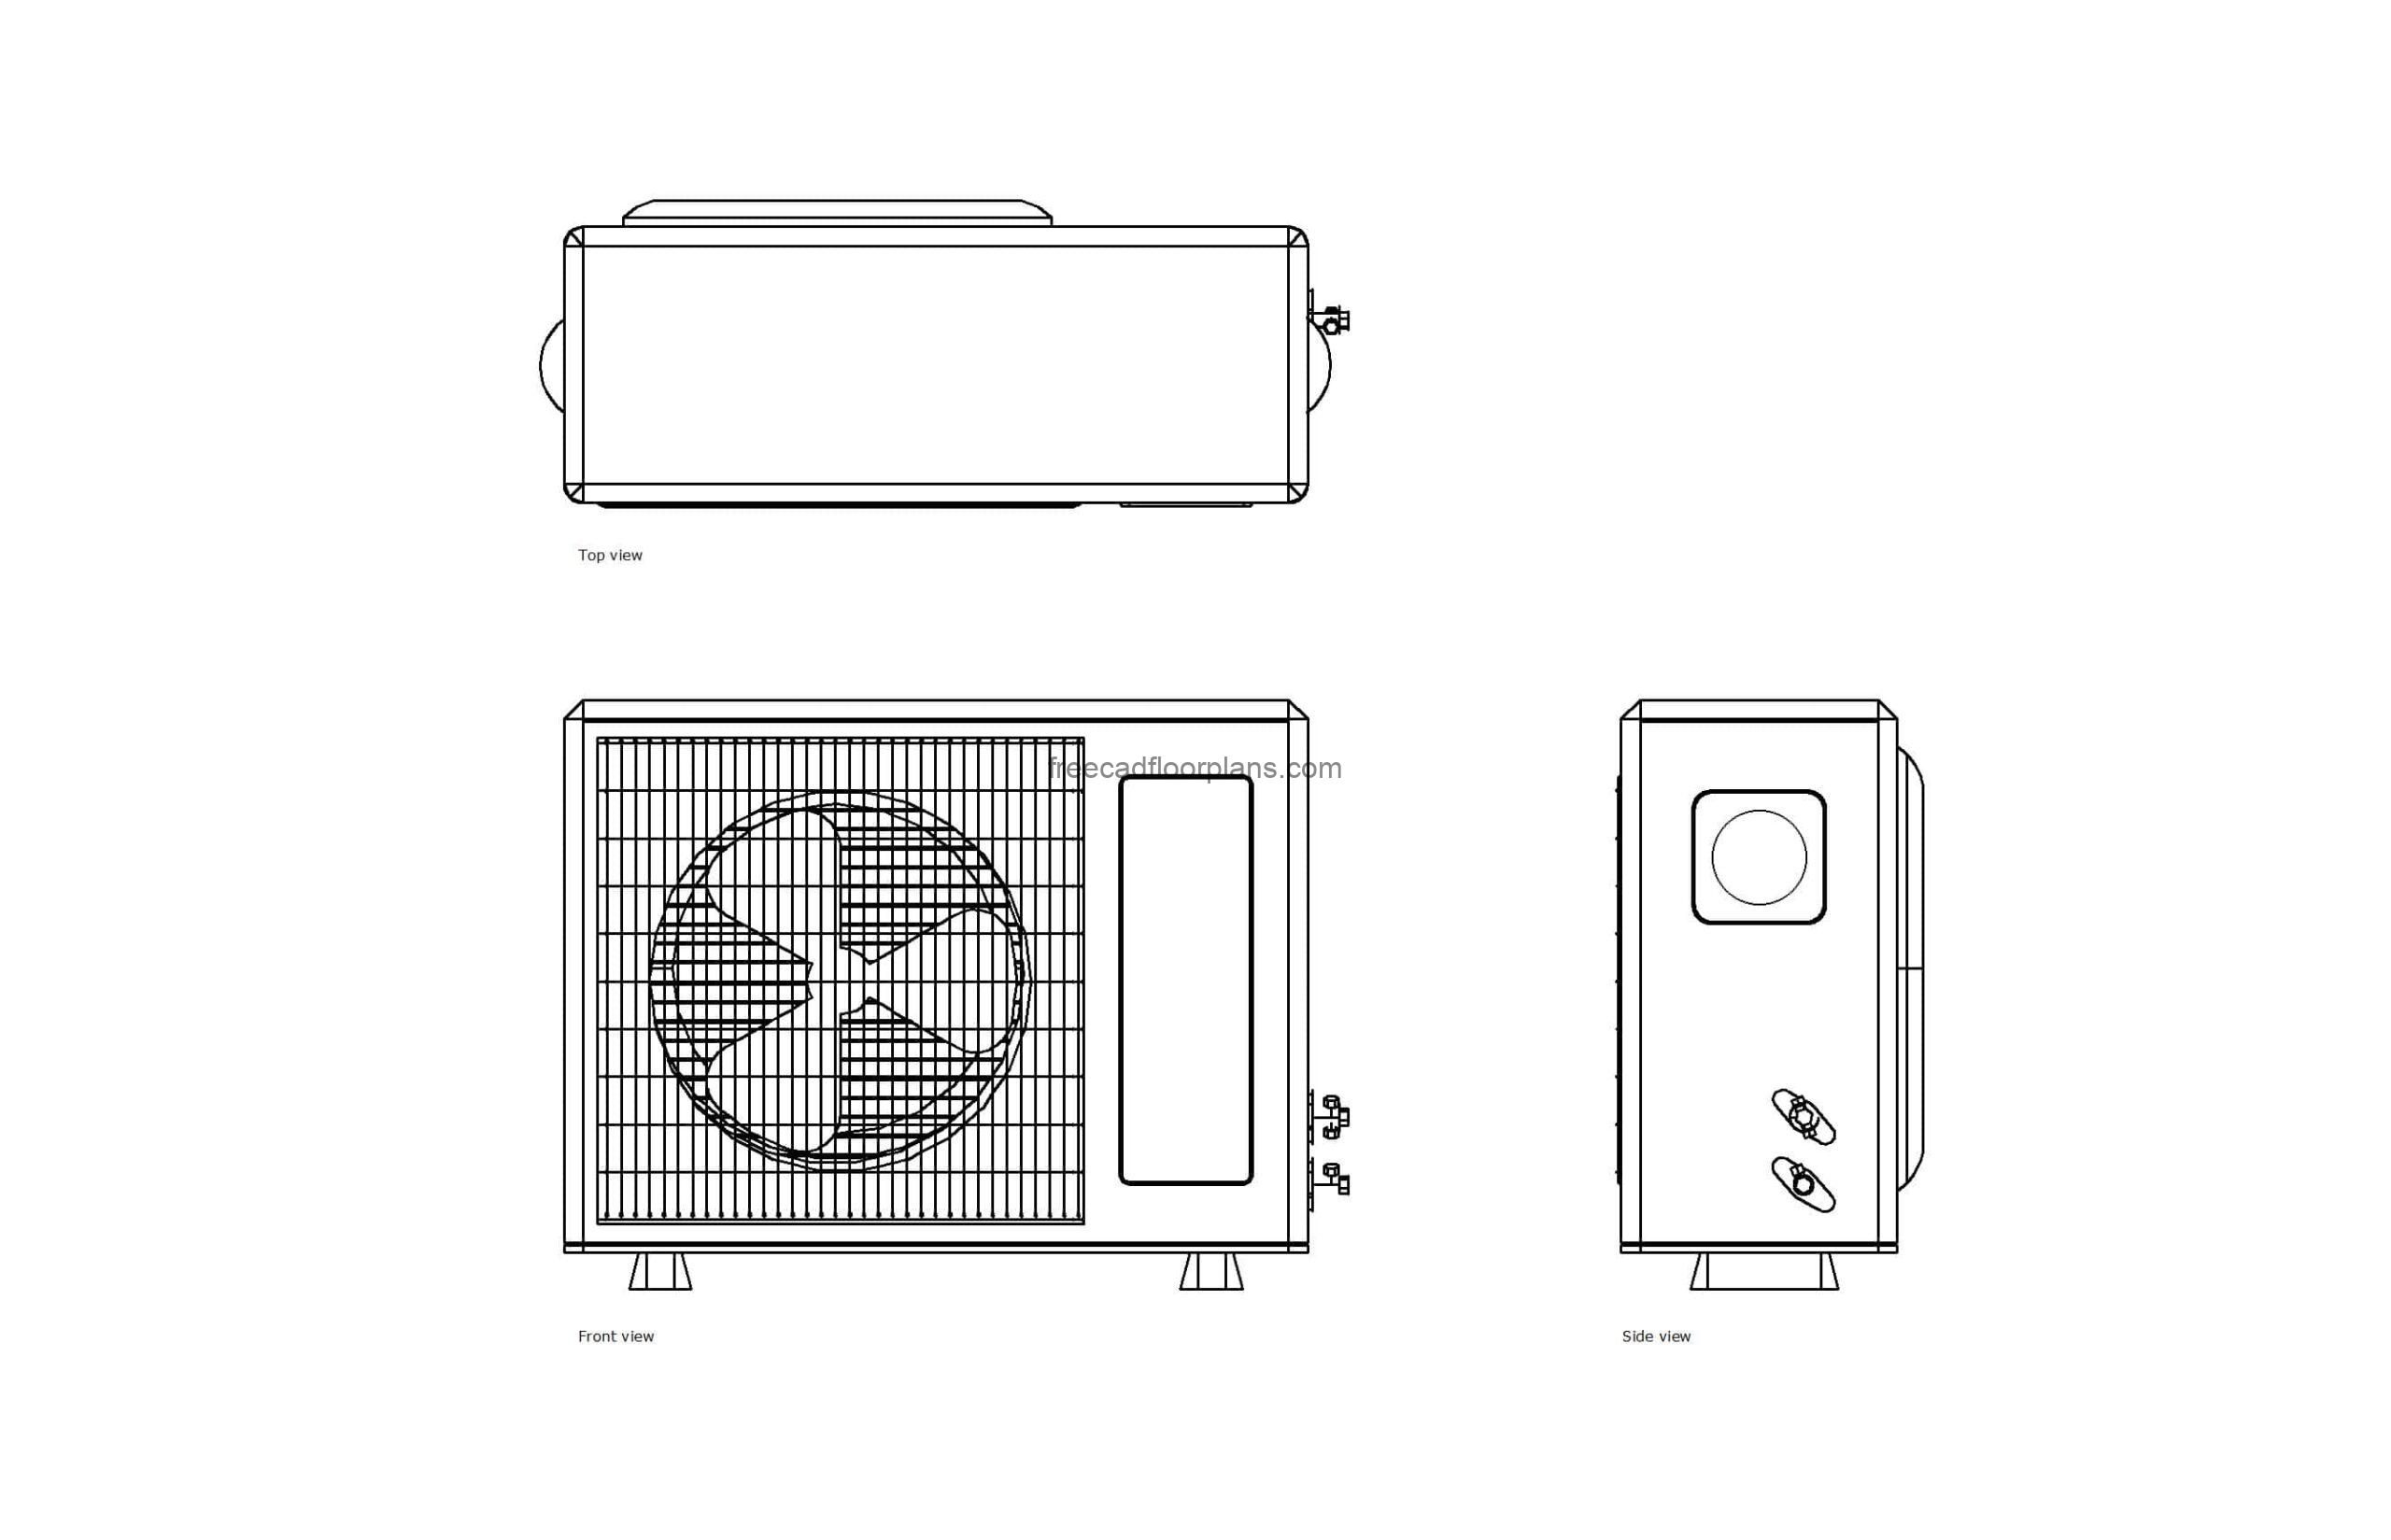 ac condenser autocad 2d drawing plan and elevation 2d views, dwg file free for download